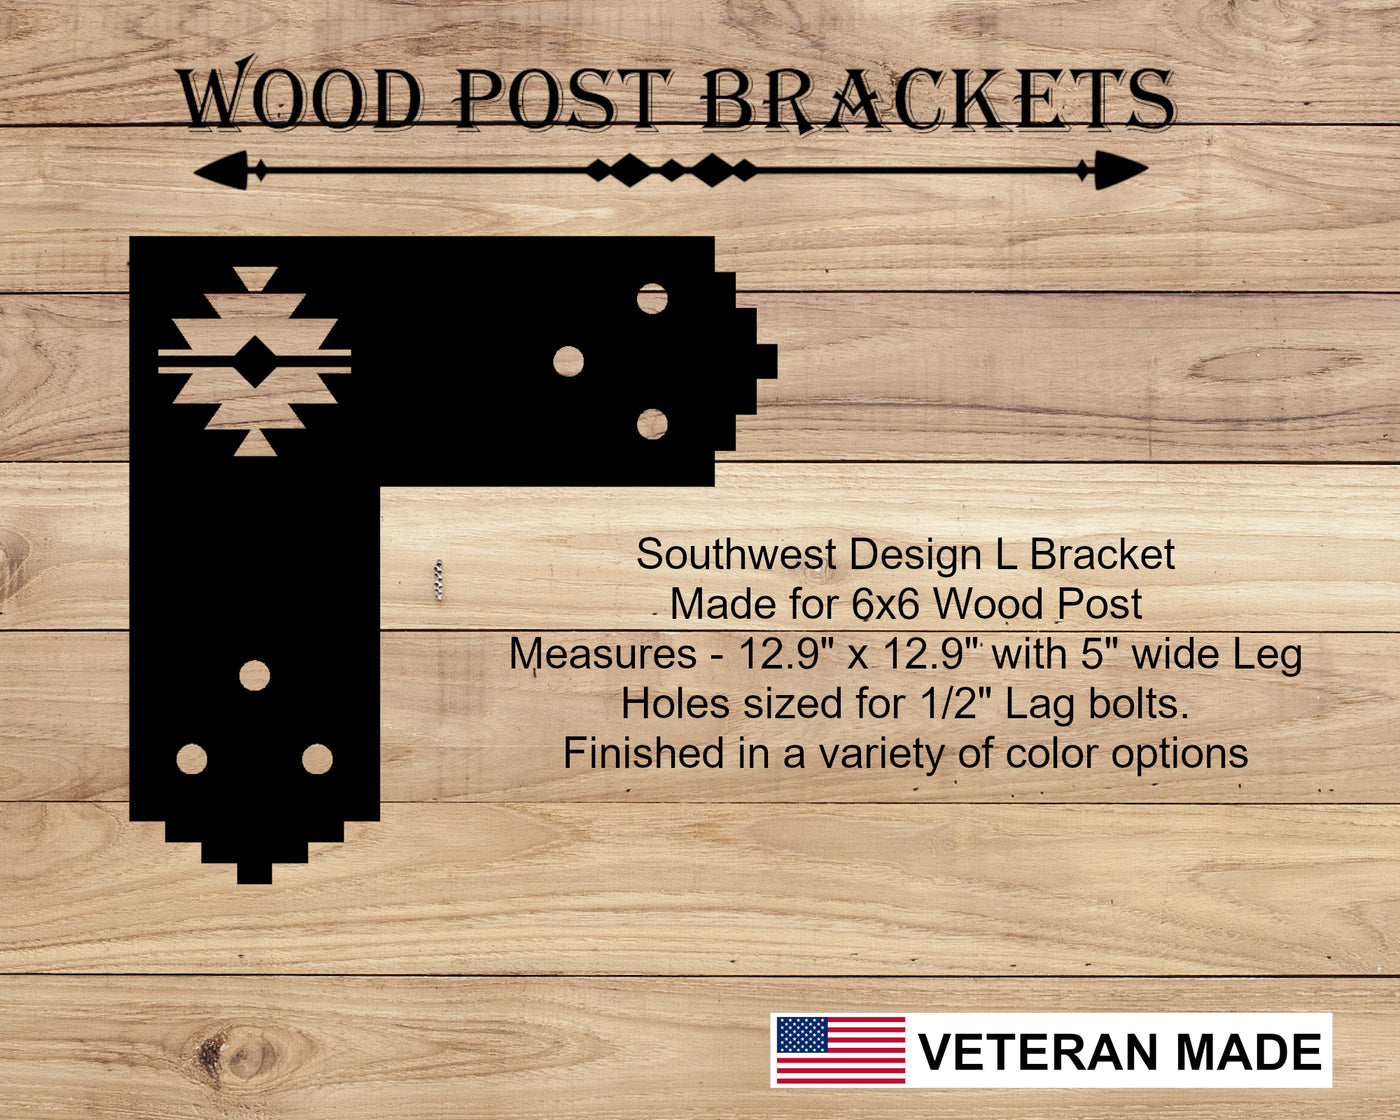 Southwest Style Brackets for 6" Post - Madison Iron and Wood - Brackets - metal outdoor decor - Steel deocrations - american made products - veteran owned business products - fencing decorations - fencing supplies - custom wall decorations - personalized wall signs - steel - decorative post caps - steel post caps - metal post caps - brackets - structural brackets - home improvement - easter - easter decorations - easter gift - easter yard decor